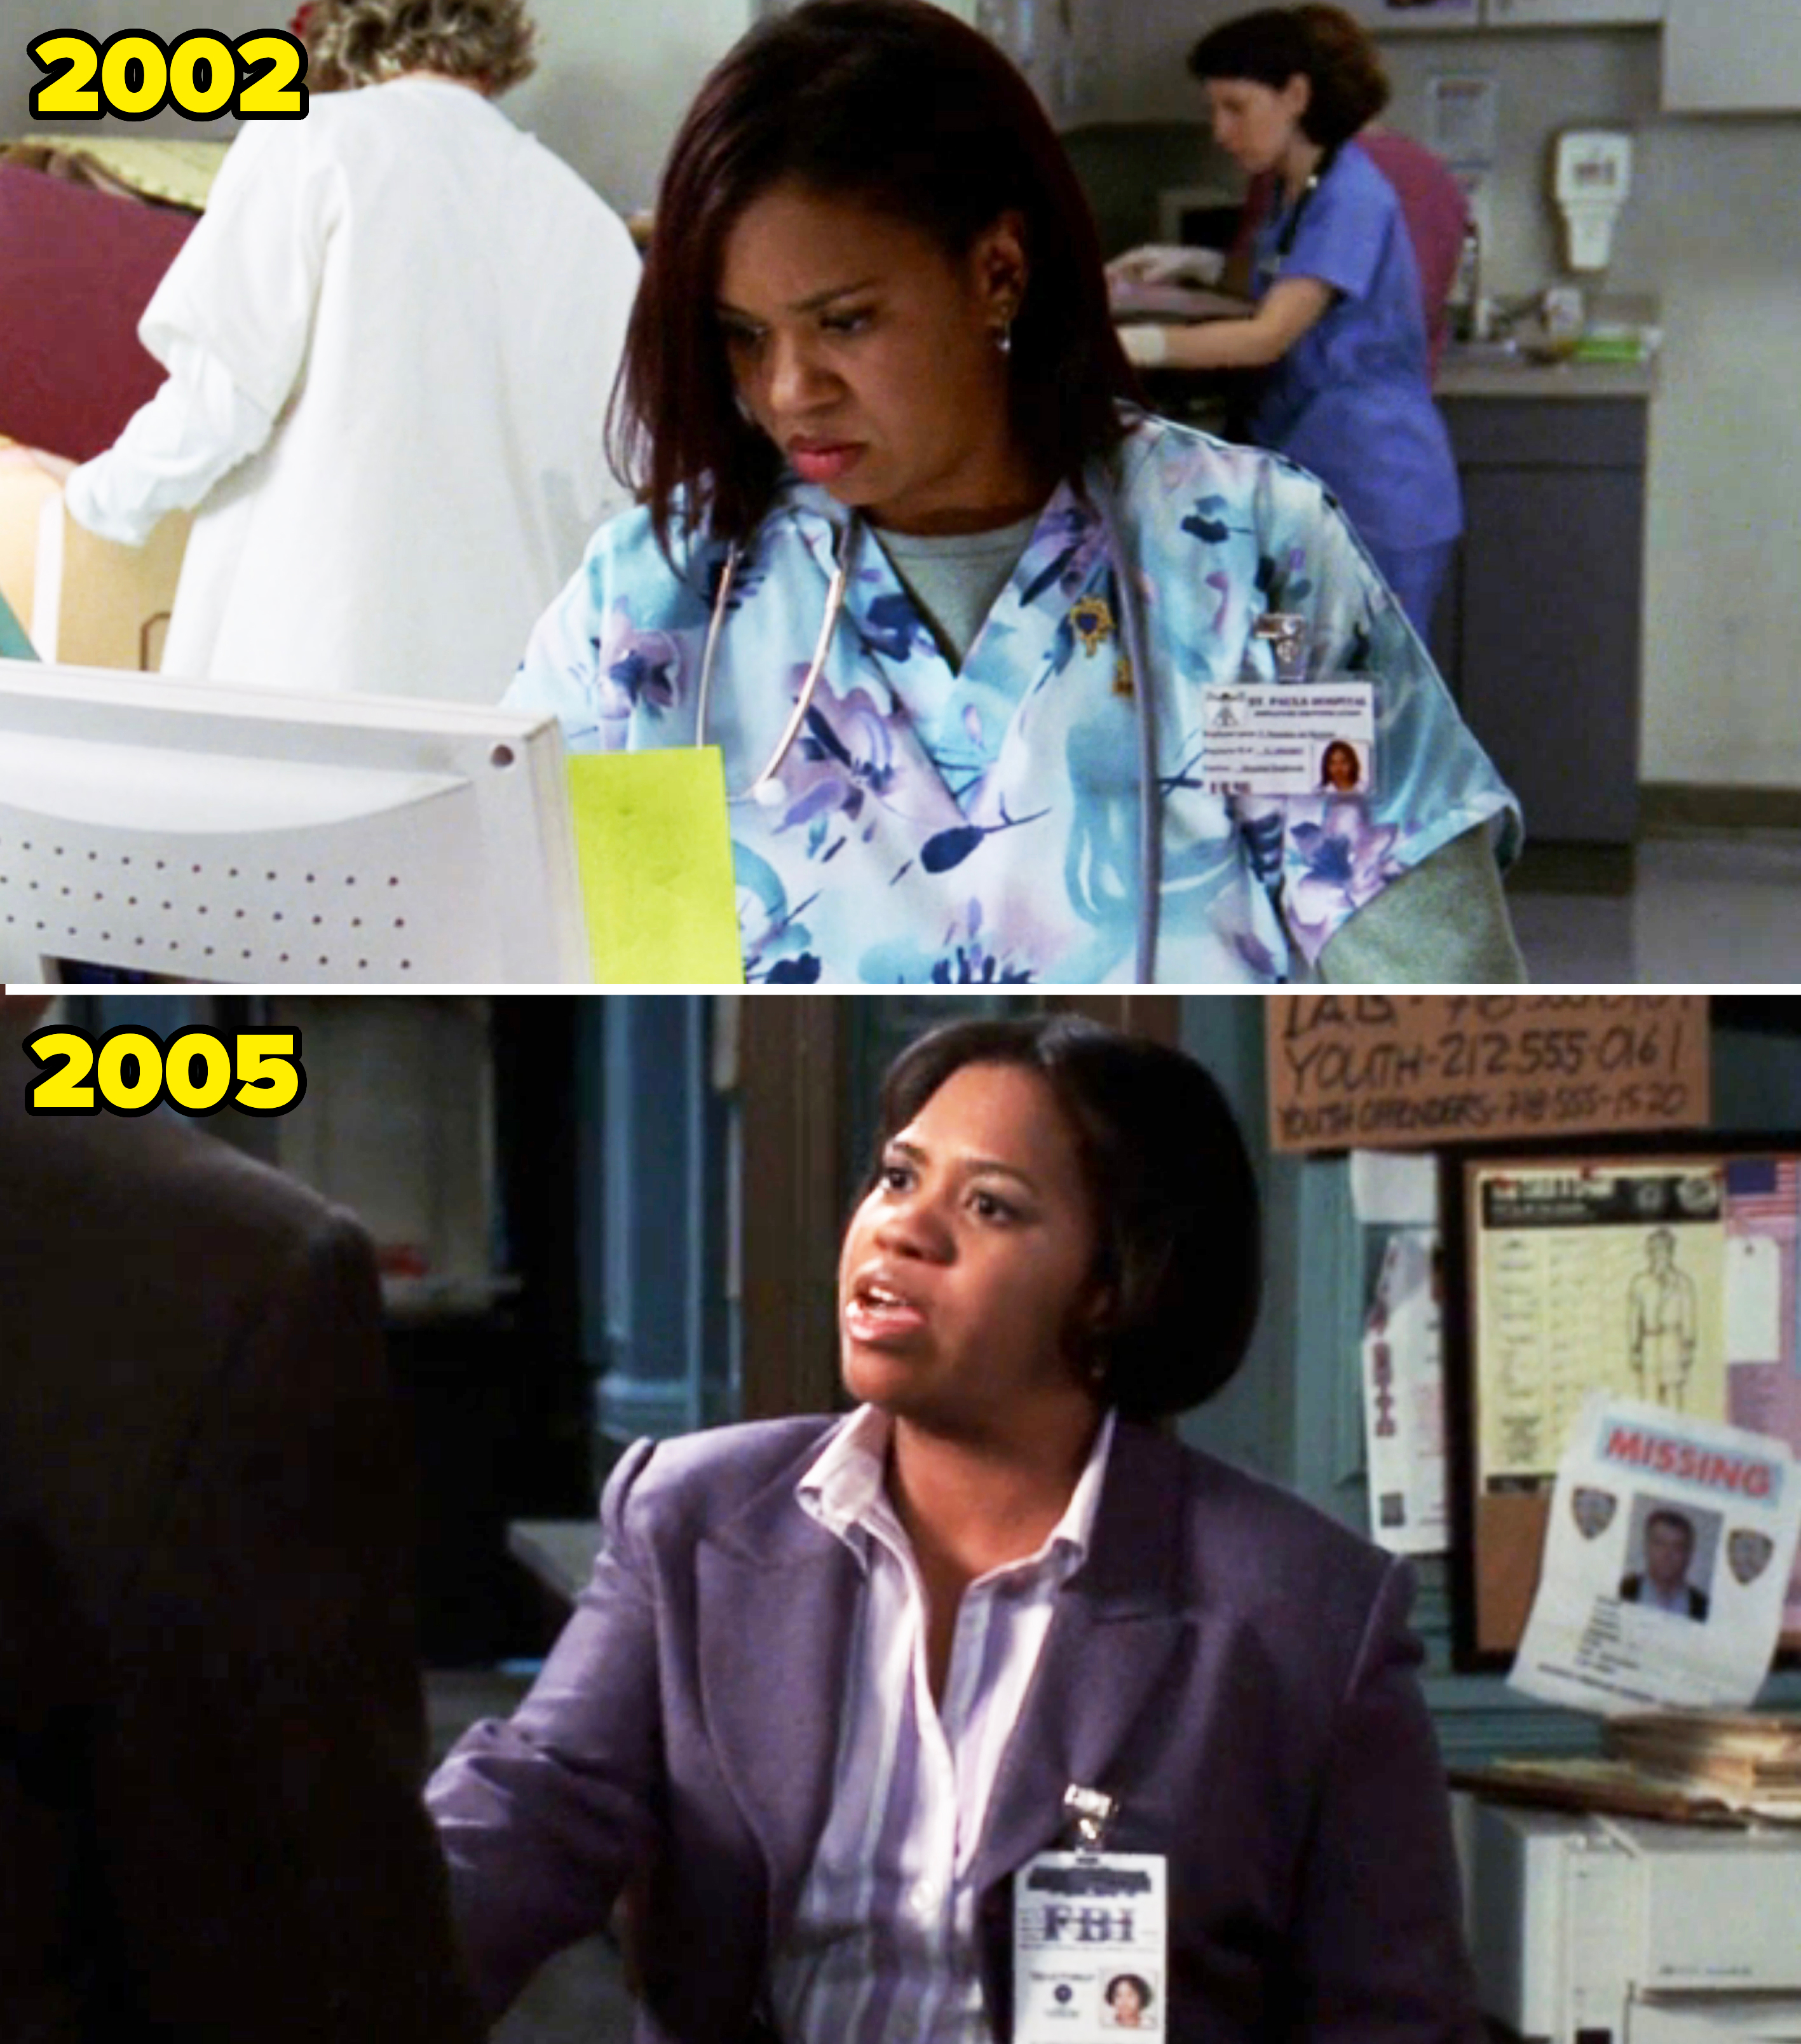 her character in 2002 and 2005